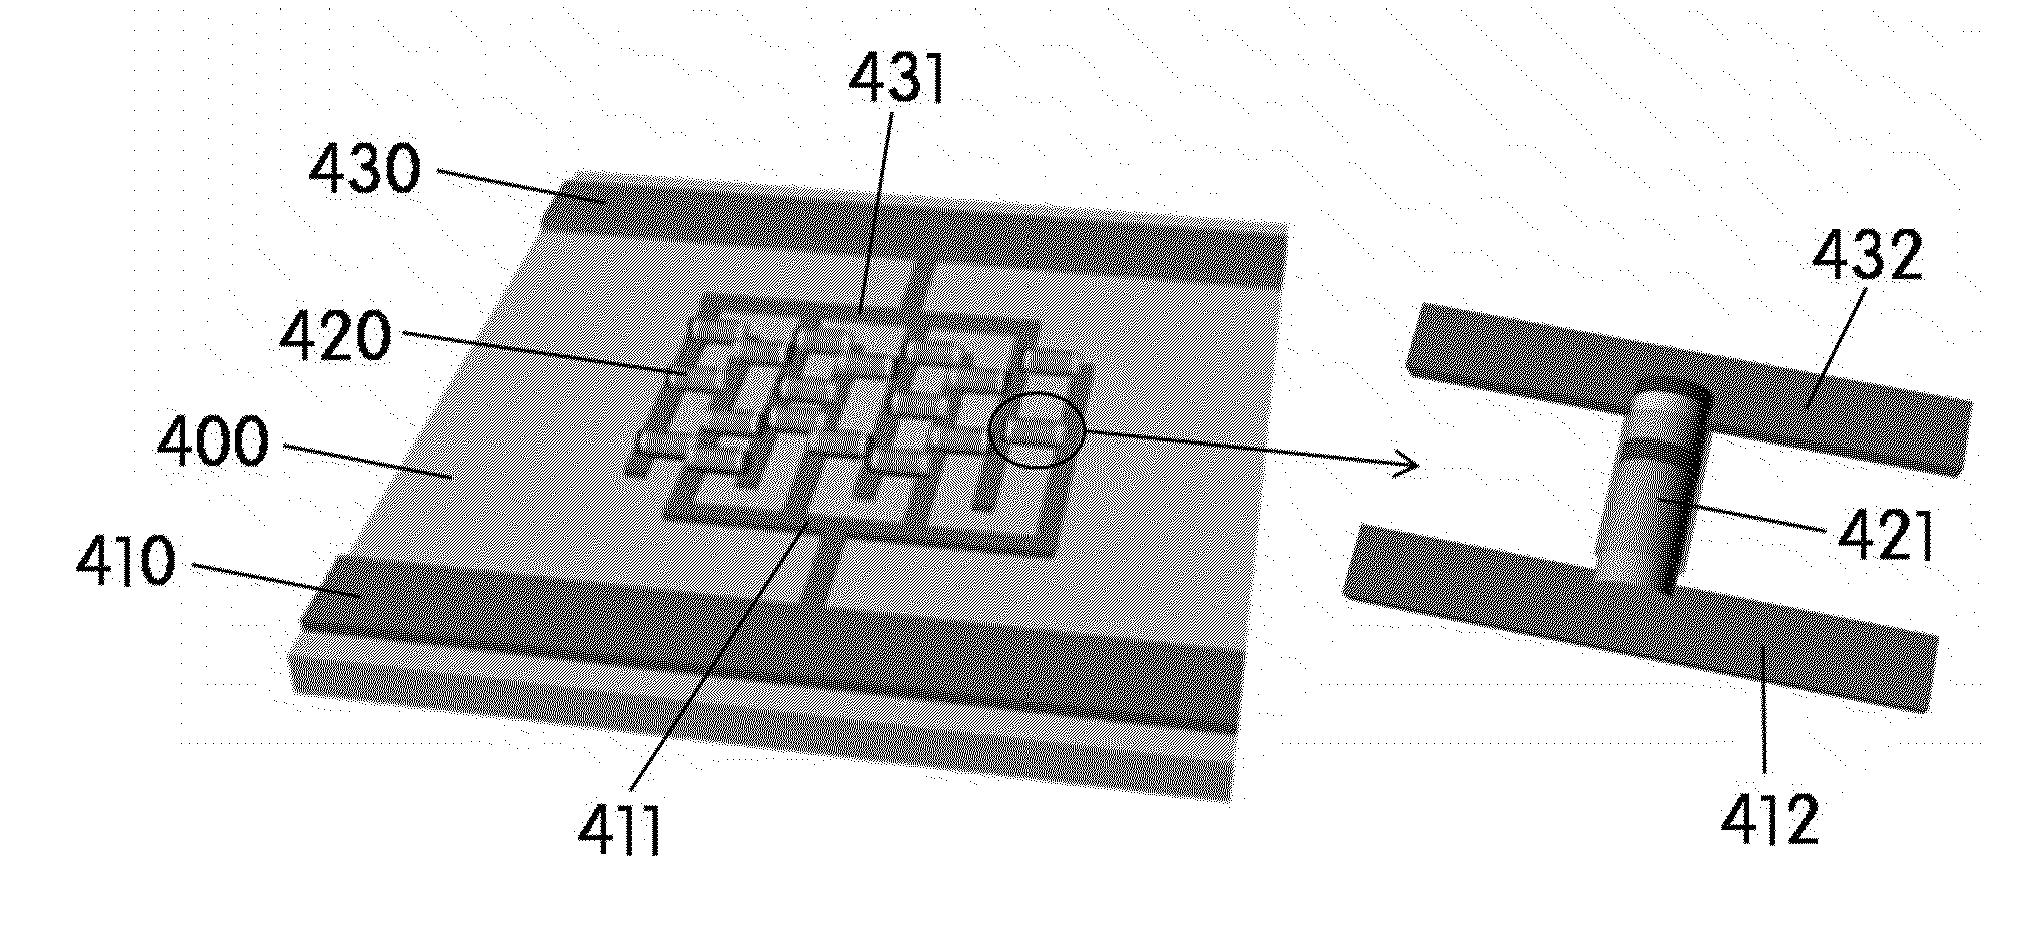 Ultra-small LED electrode assembly and method for manufacturing same